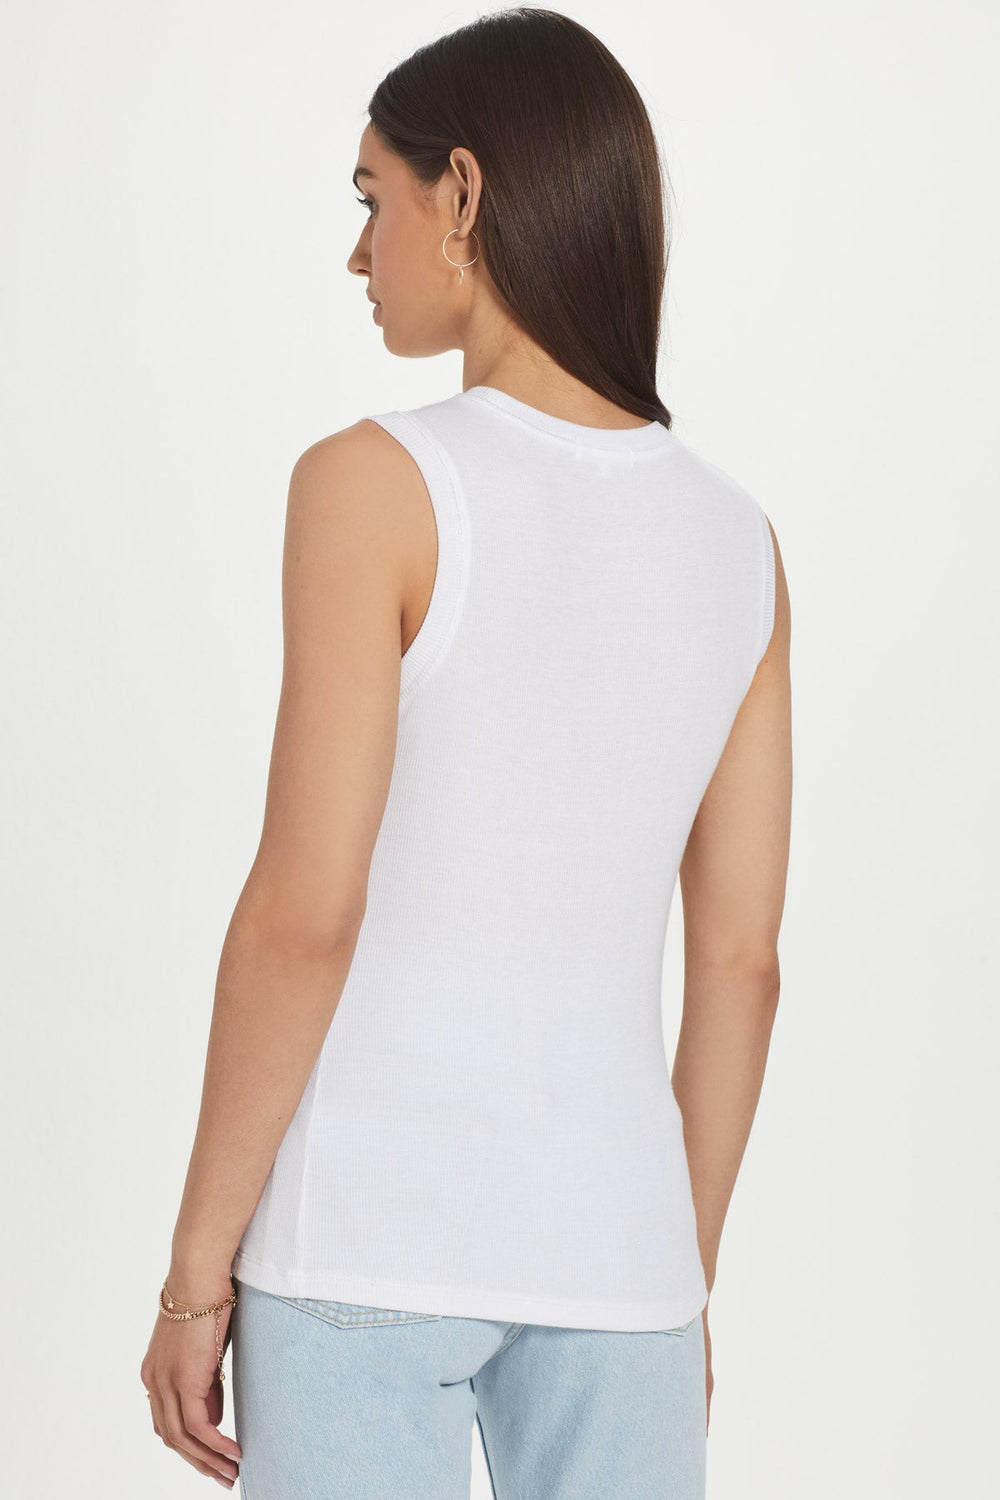 Ribbed Sleeveless Tee in White - Madison's Niche 